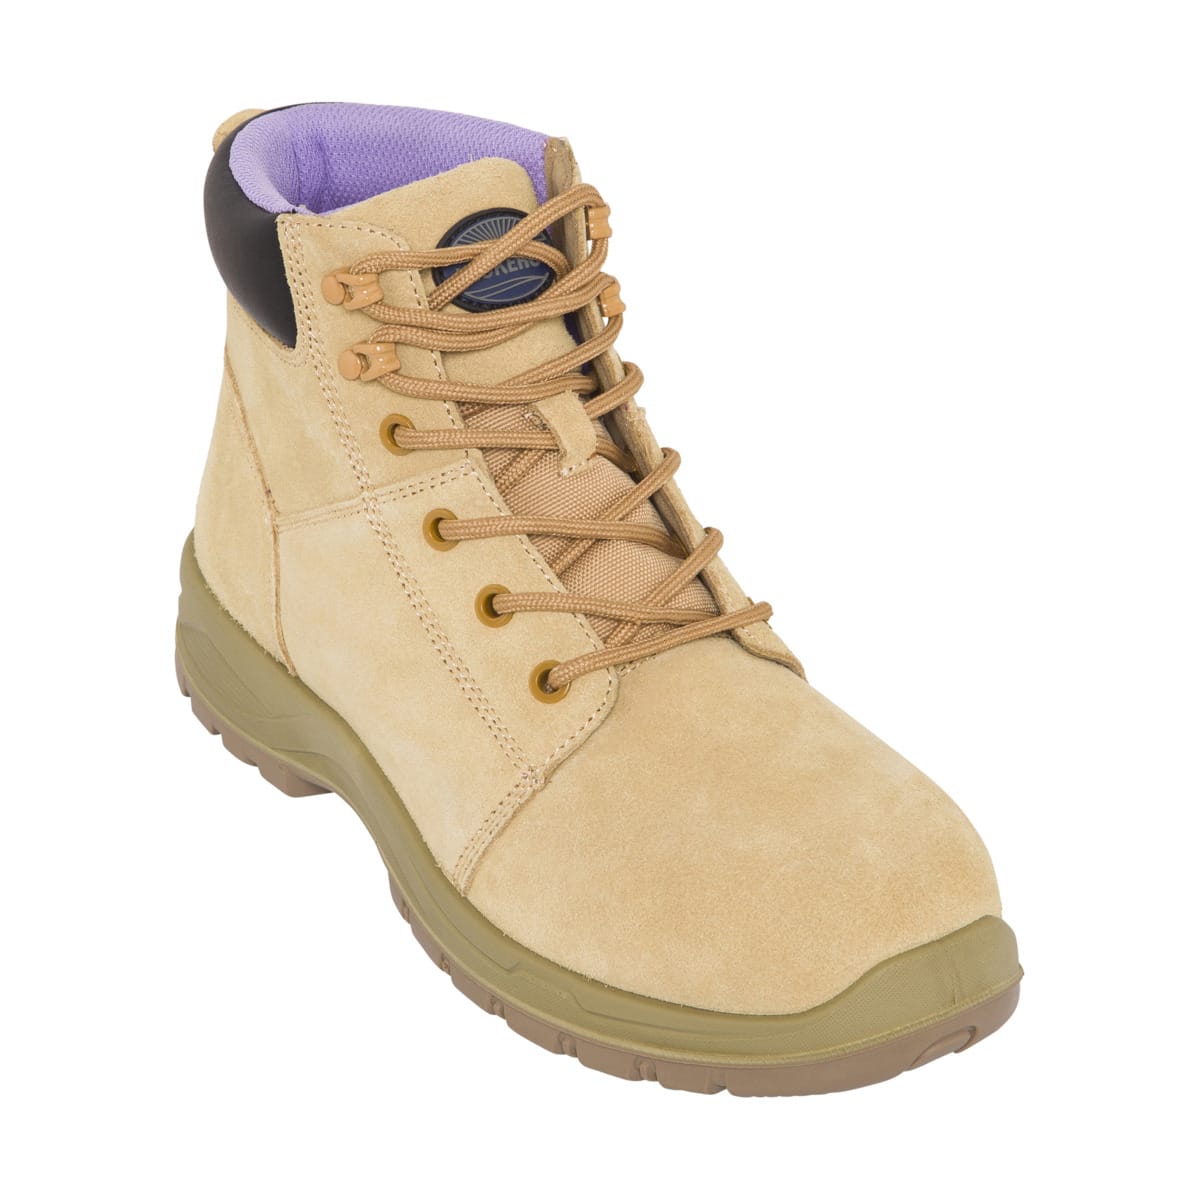 Narrow Fit Lace Up Work Boots - Kmart